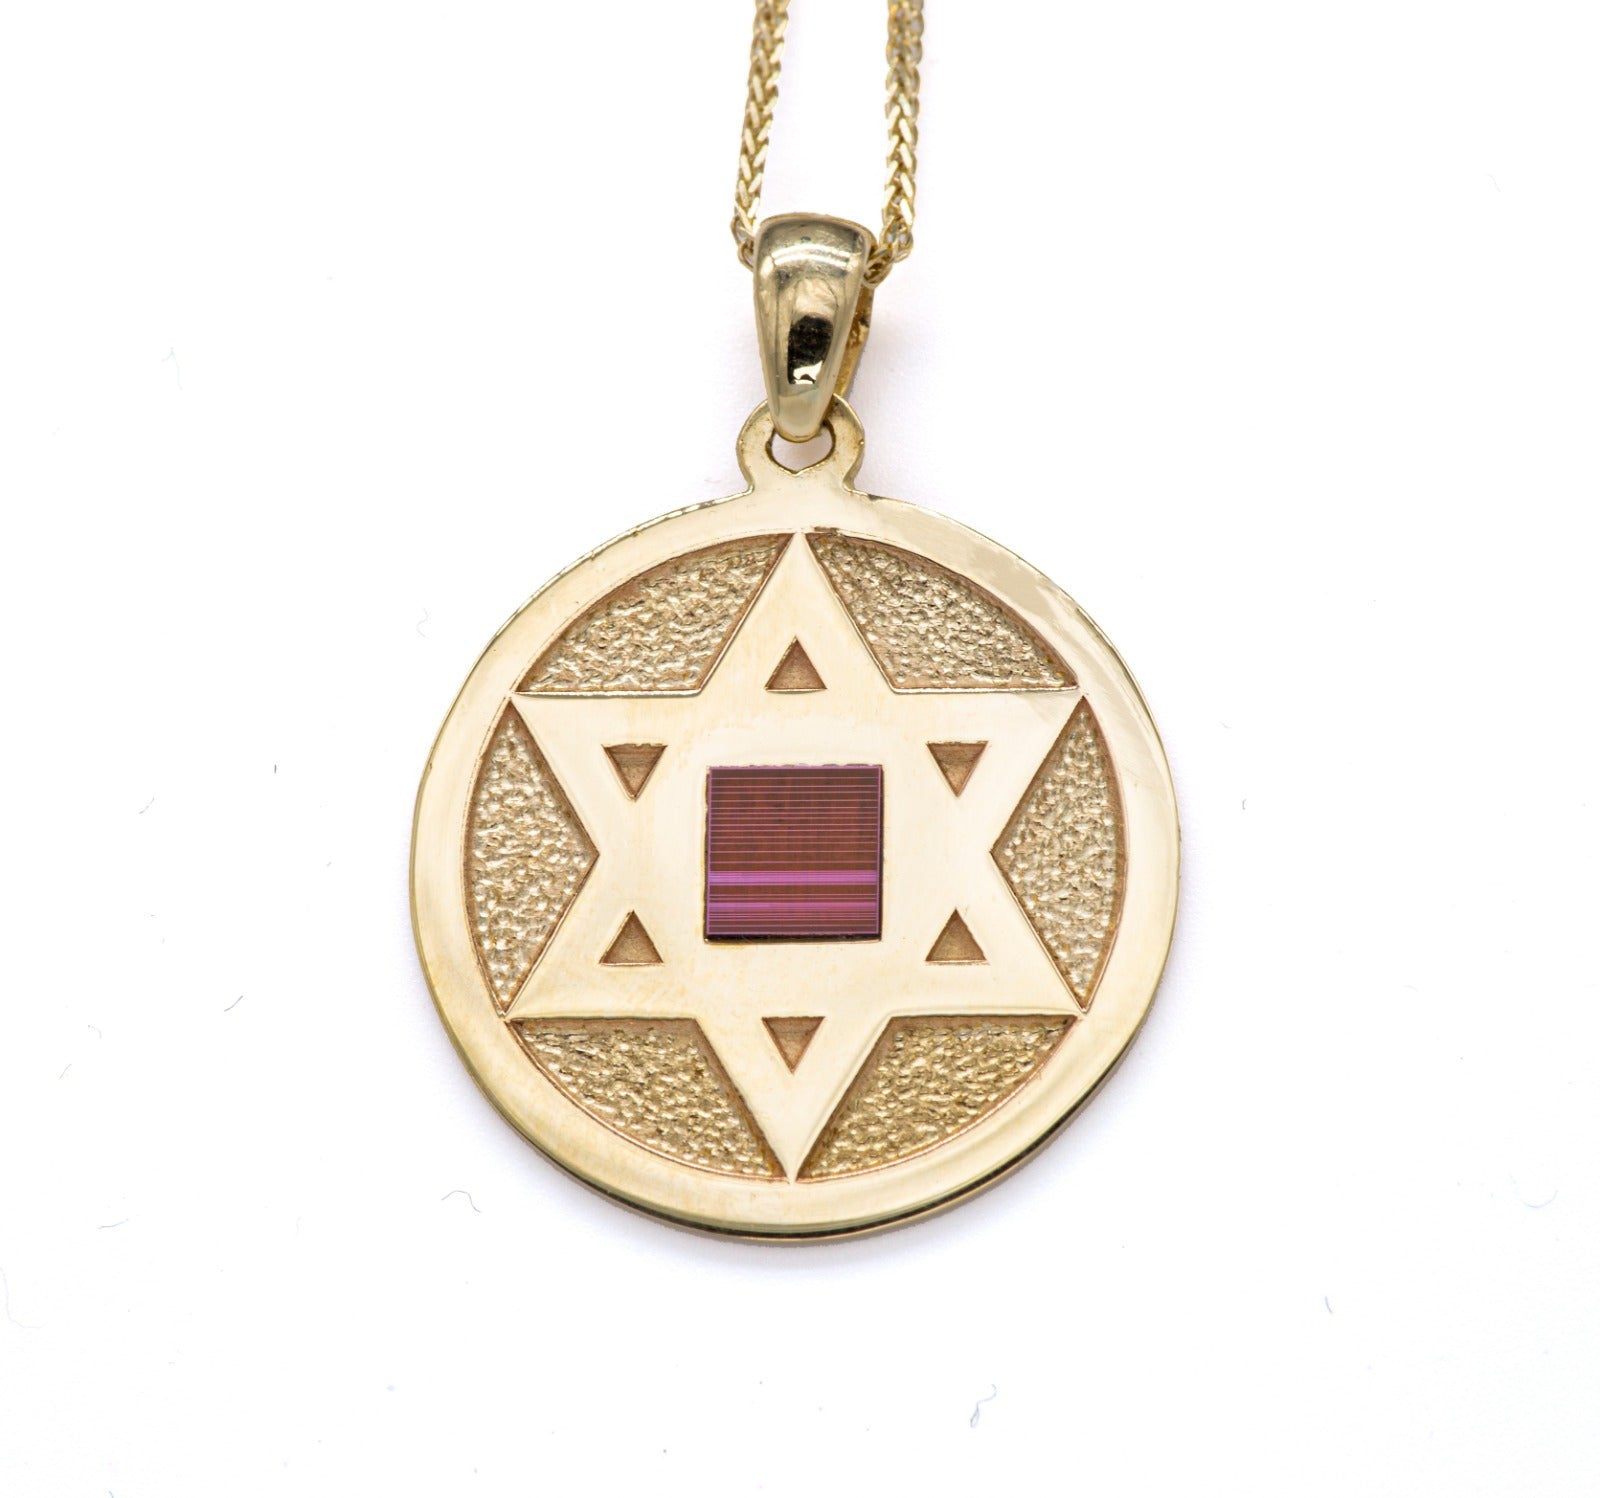 Buy GOLD Star of David Necklace, Delicate Star of David Necklace, Judaica  Jewelry, David Star Necklace, Gold Magen David, Jewish Jewelry, Gift.  Online in India - Etsy